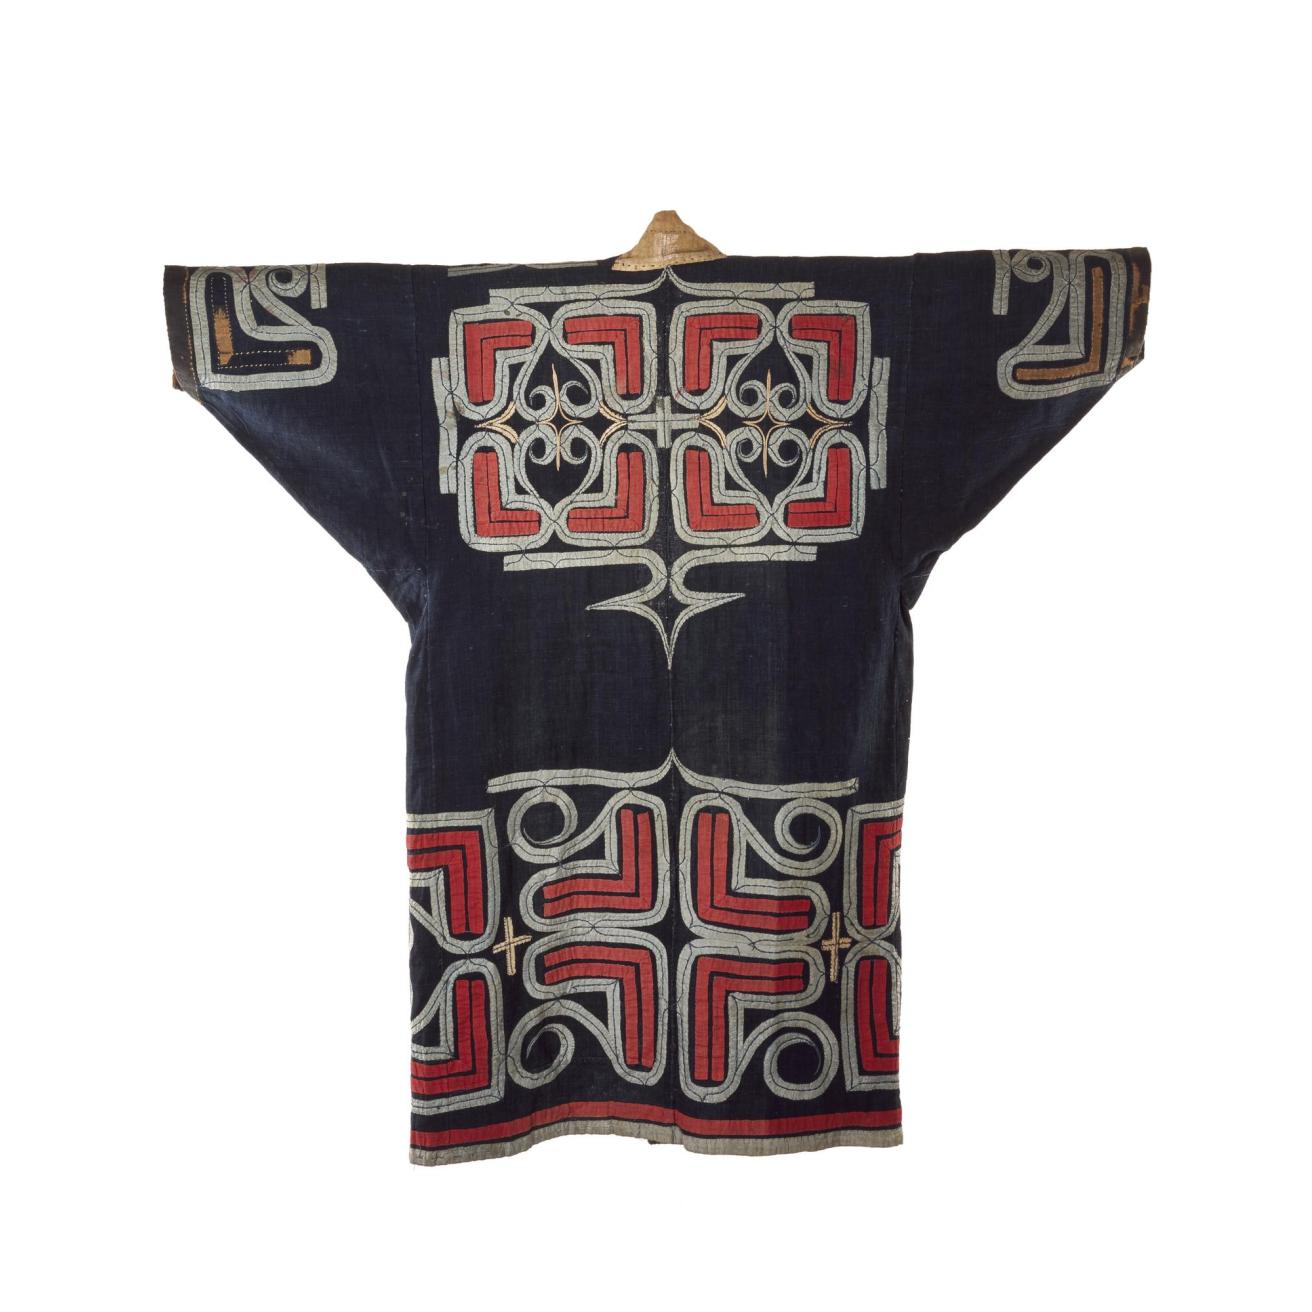 Robe (ruunpe), dark blue cotton cloth with red and white abstract applique decoration, worn during a ceremony: Japan, Hokkaido, Ainu, 19th to early 20th century. On display in the Living Lands gallery, National Museum of Scotland.